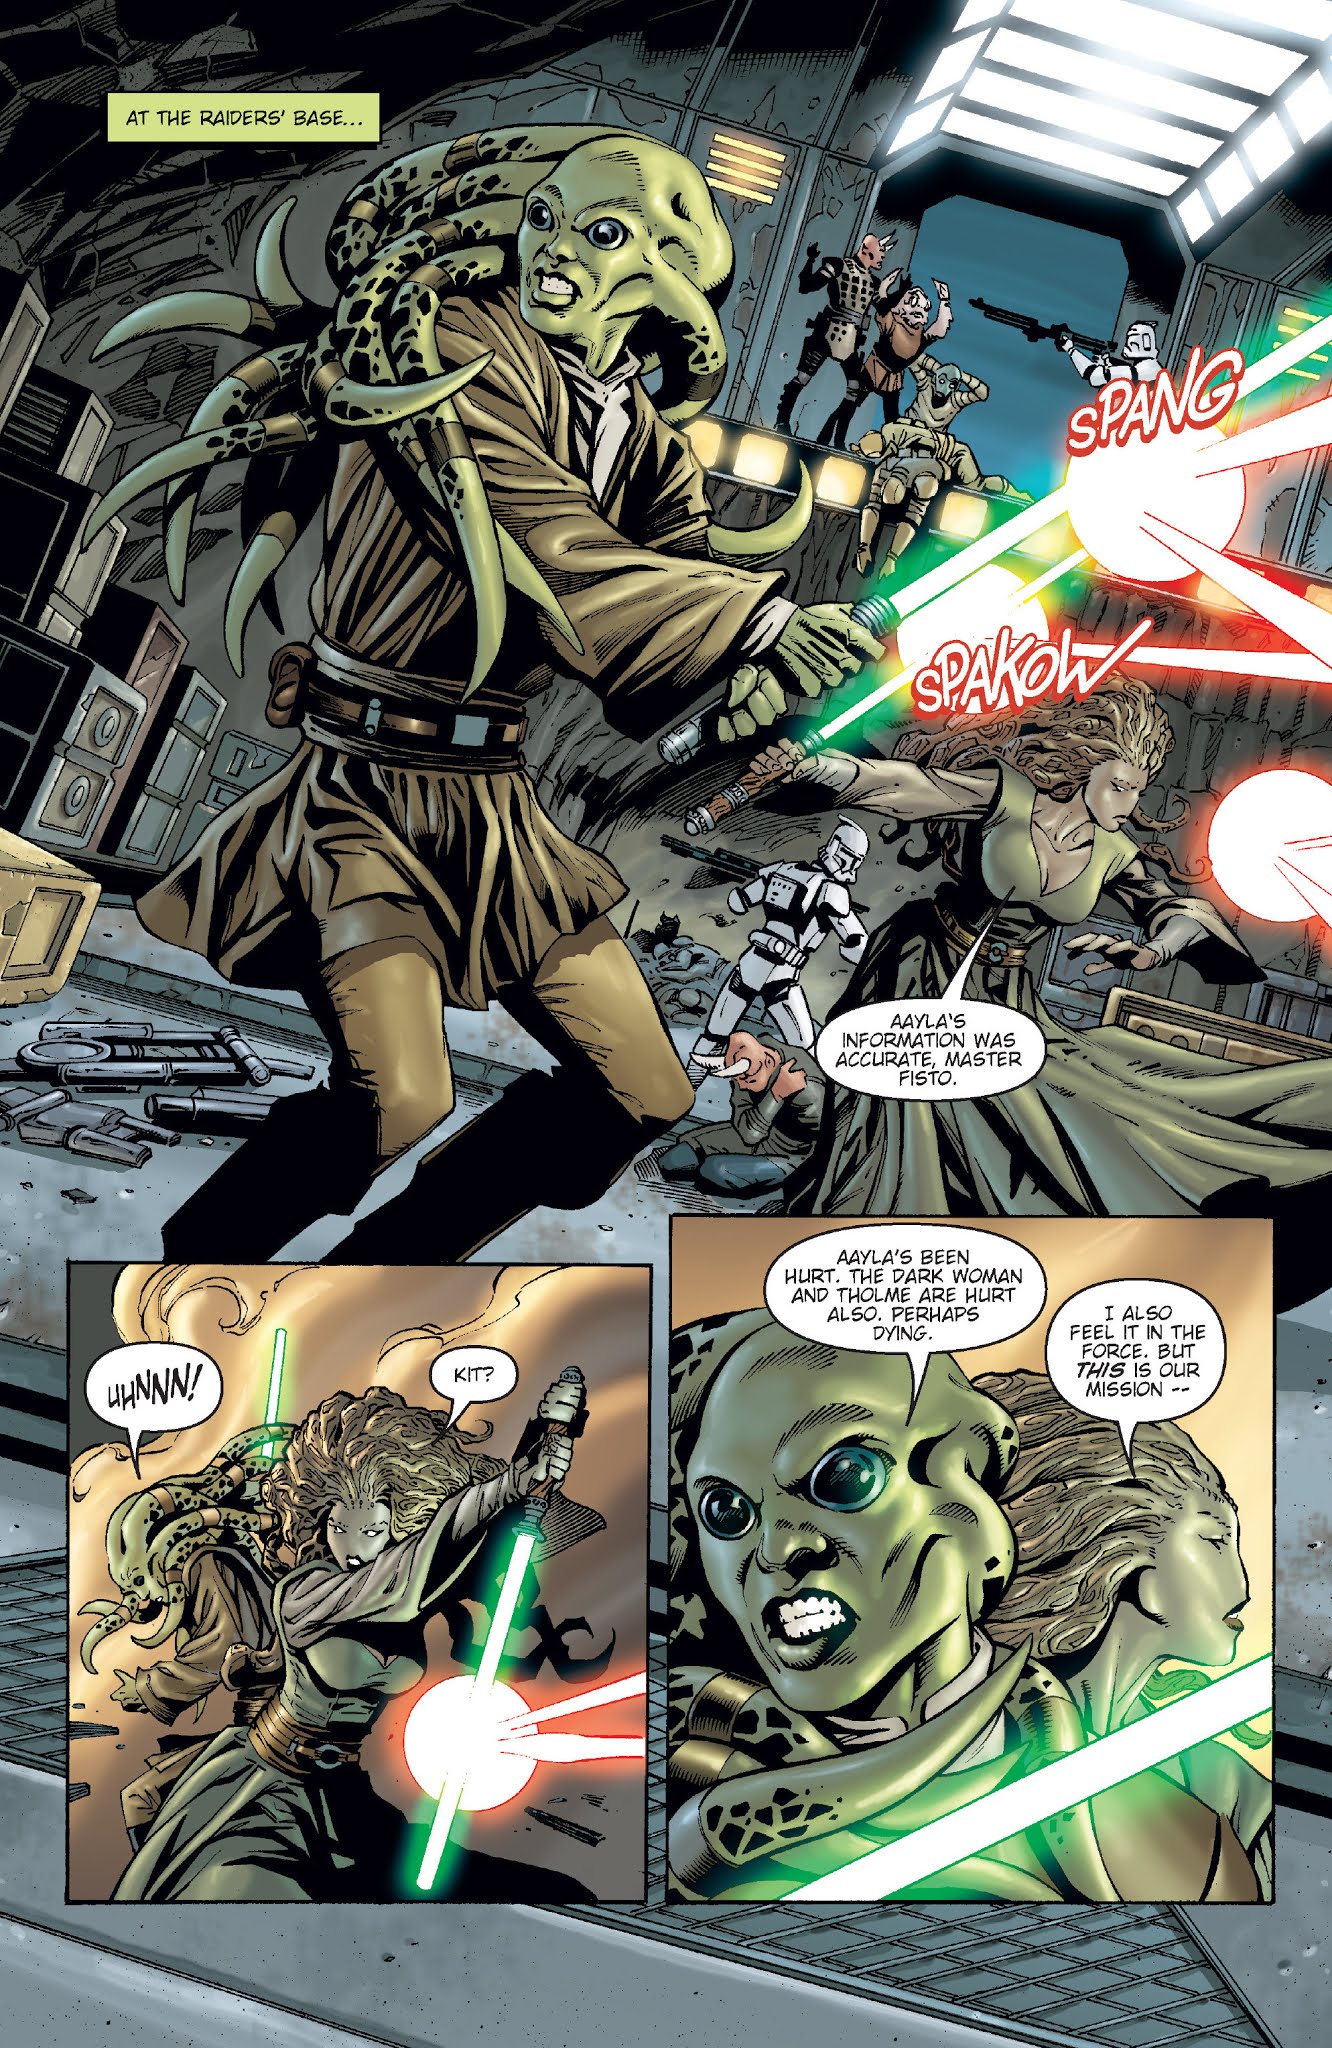 Read online Star Wars: Jedi comic -  Issue # Issue Aayla Secura - 24